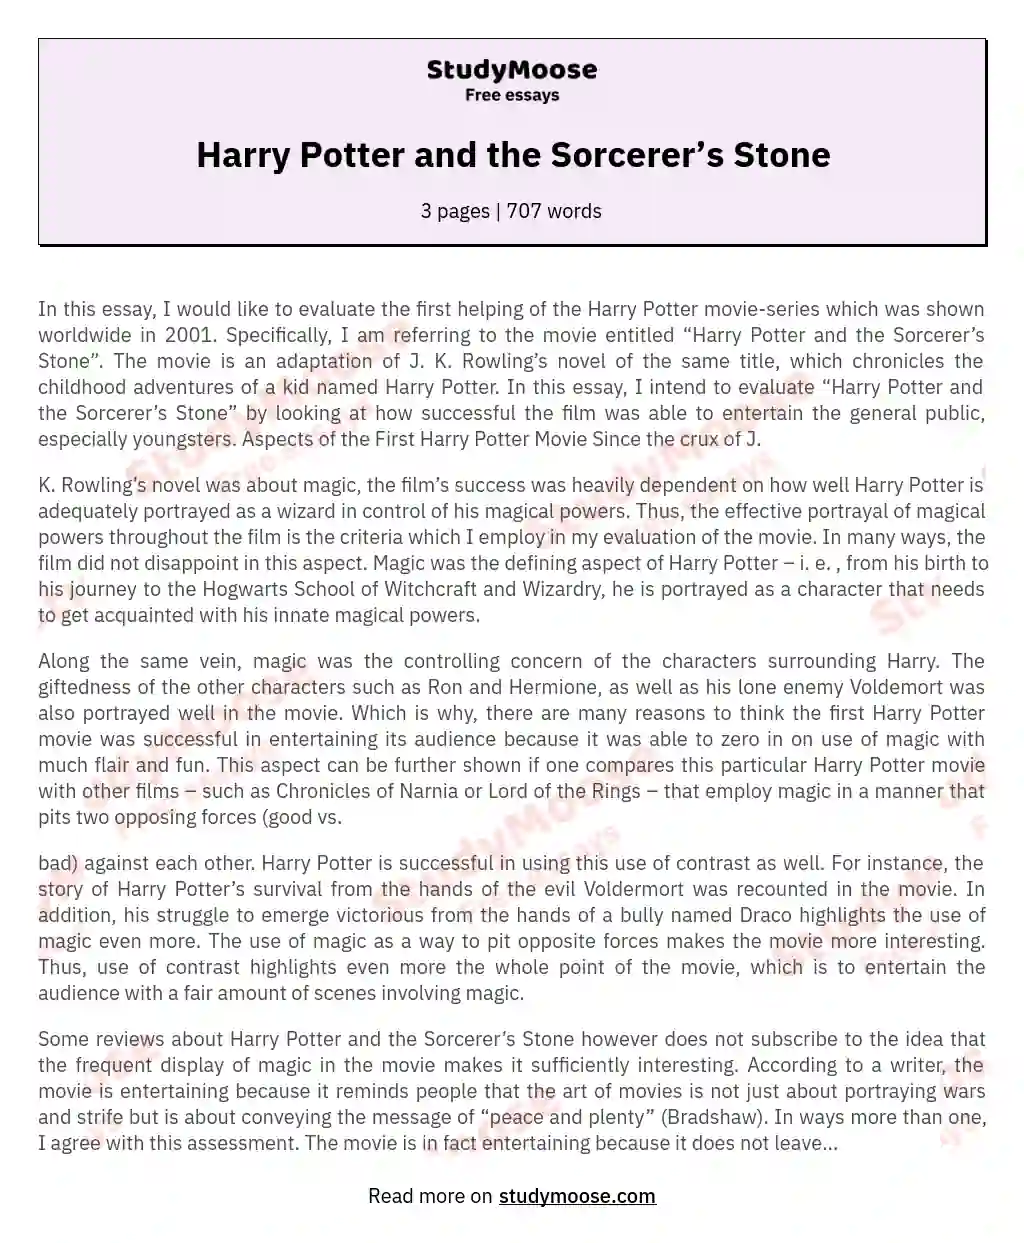 Harry Potter and the Sorcerer’s Stone essay